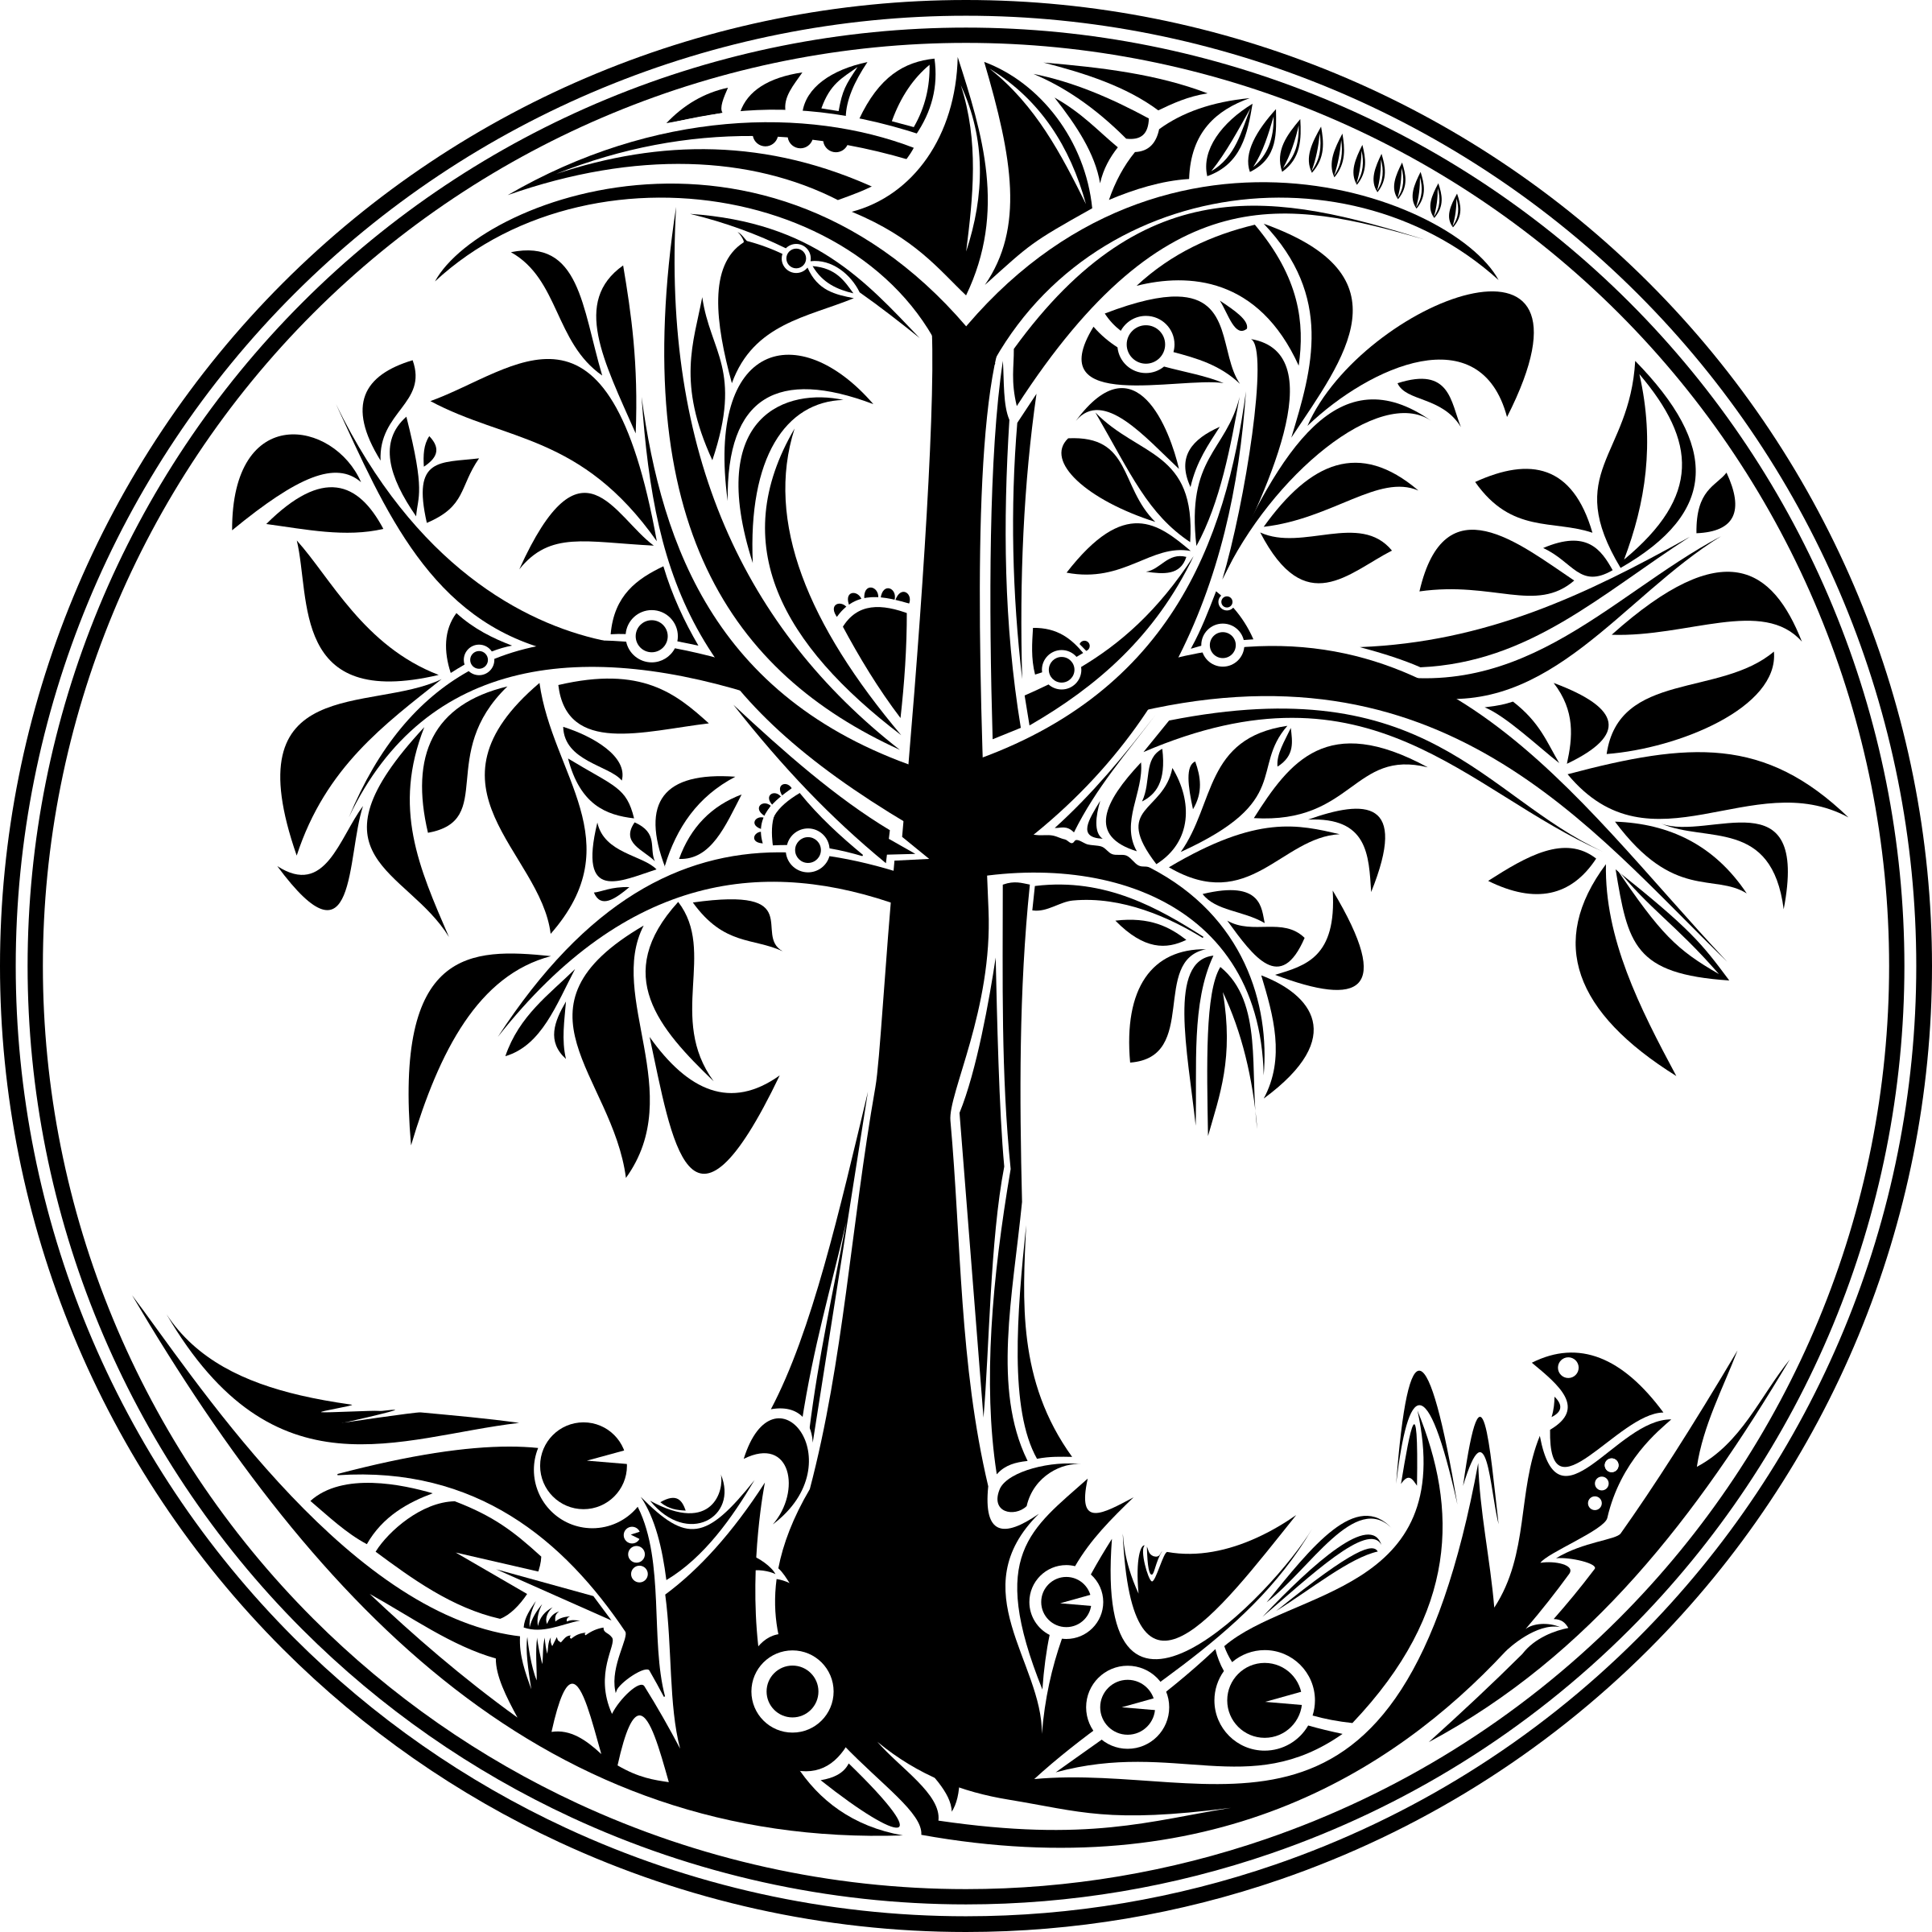 meaning of tree of life symbol